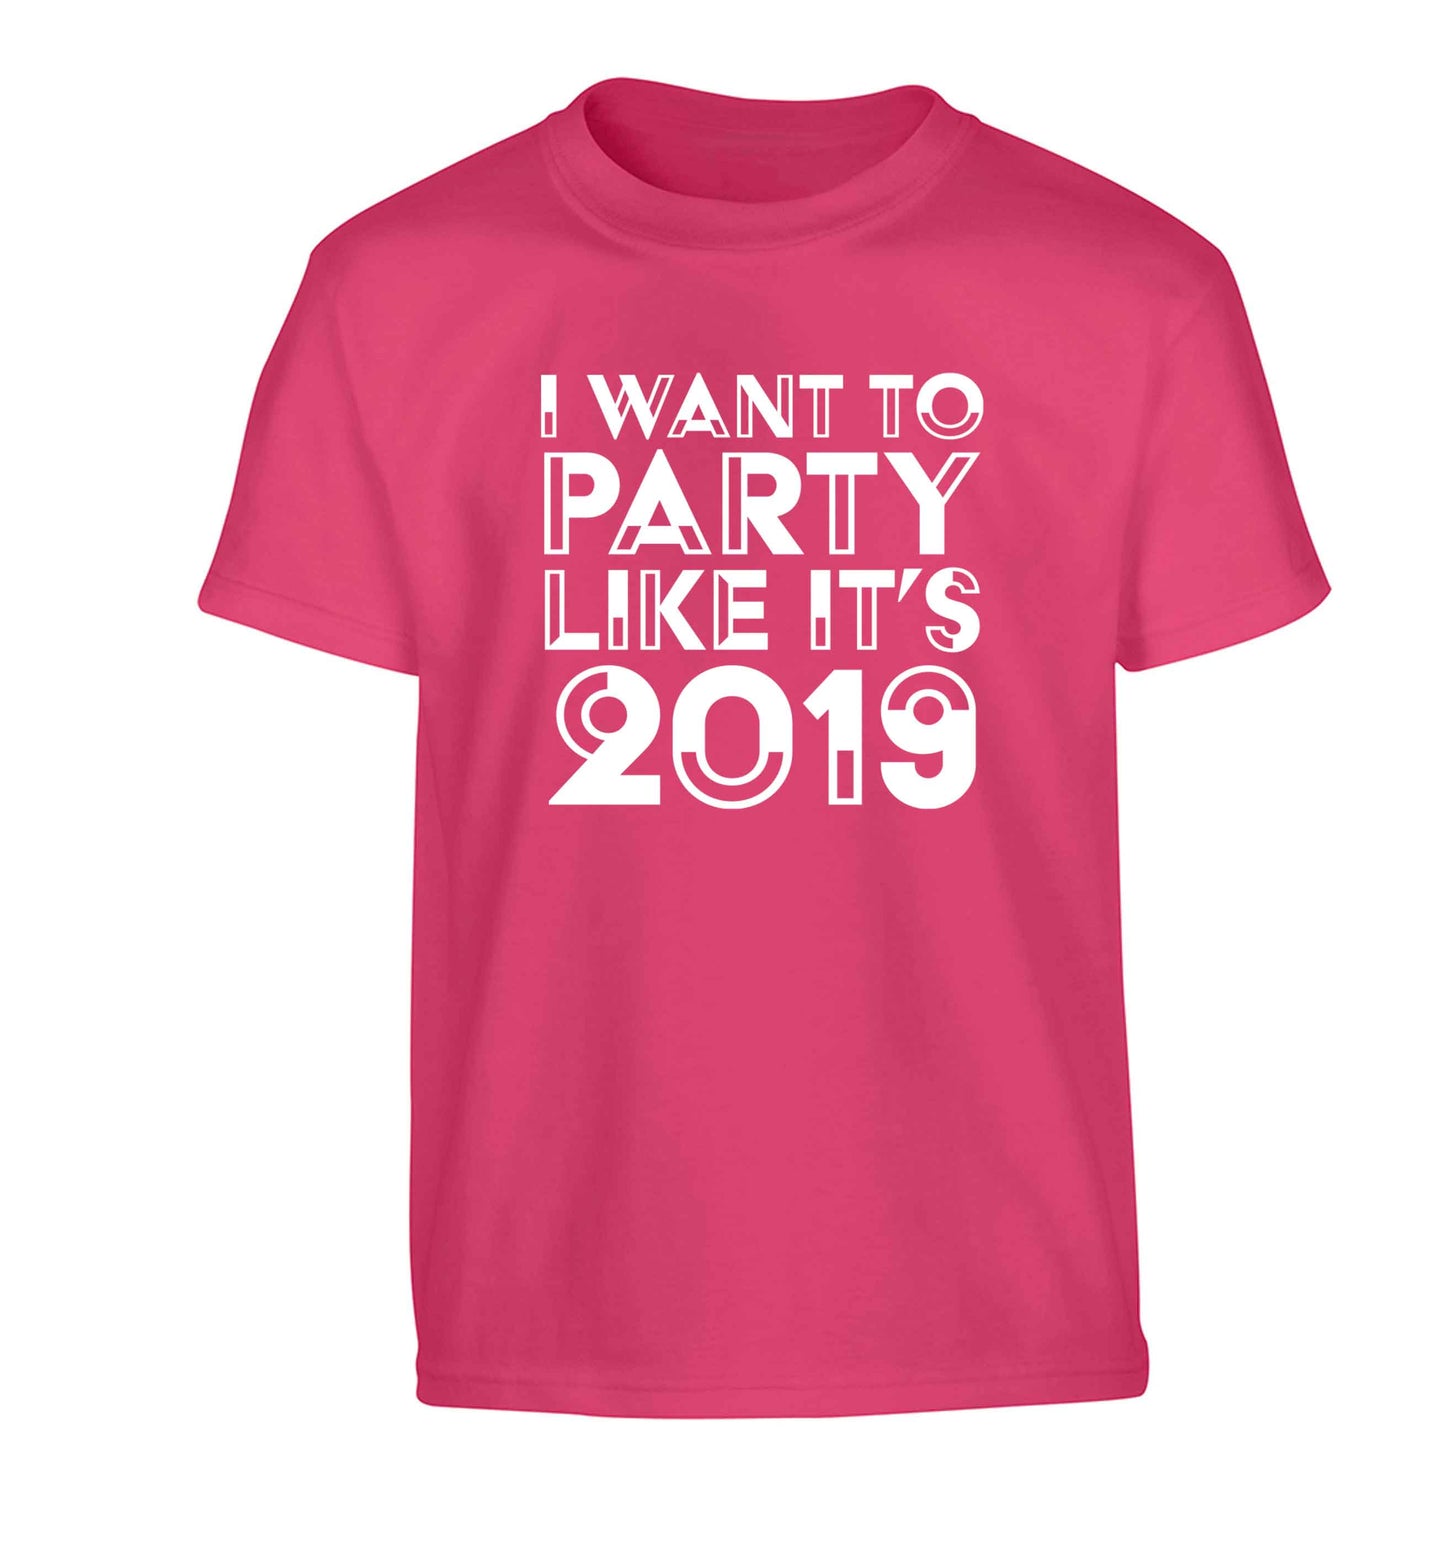 I want to party like it's 2019 Children's pink Tshirt 12-13 Years